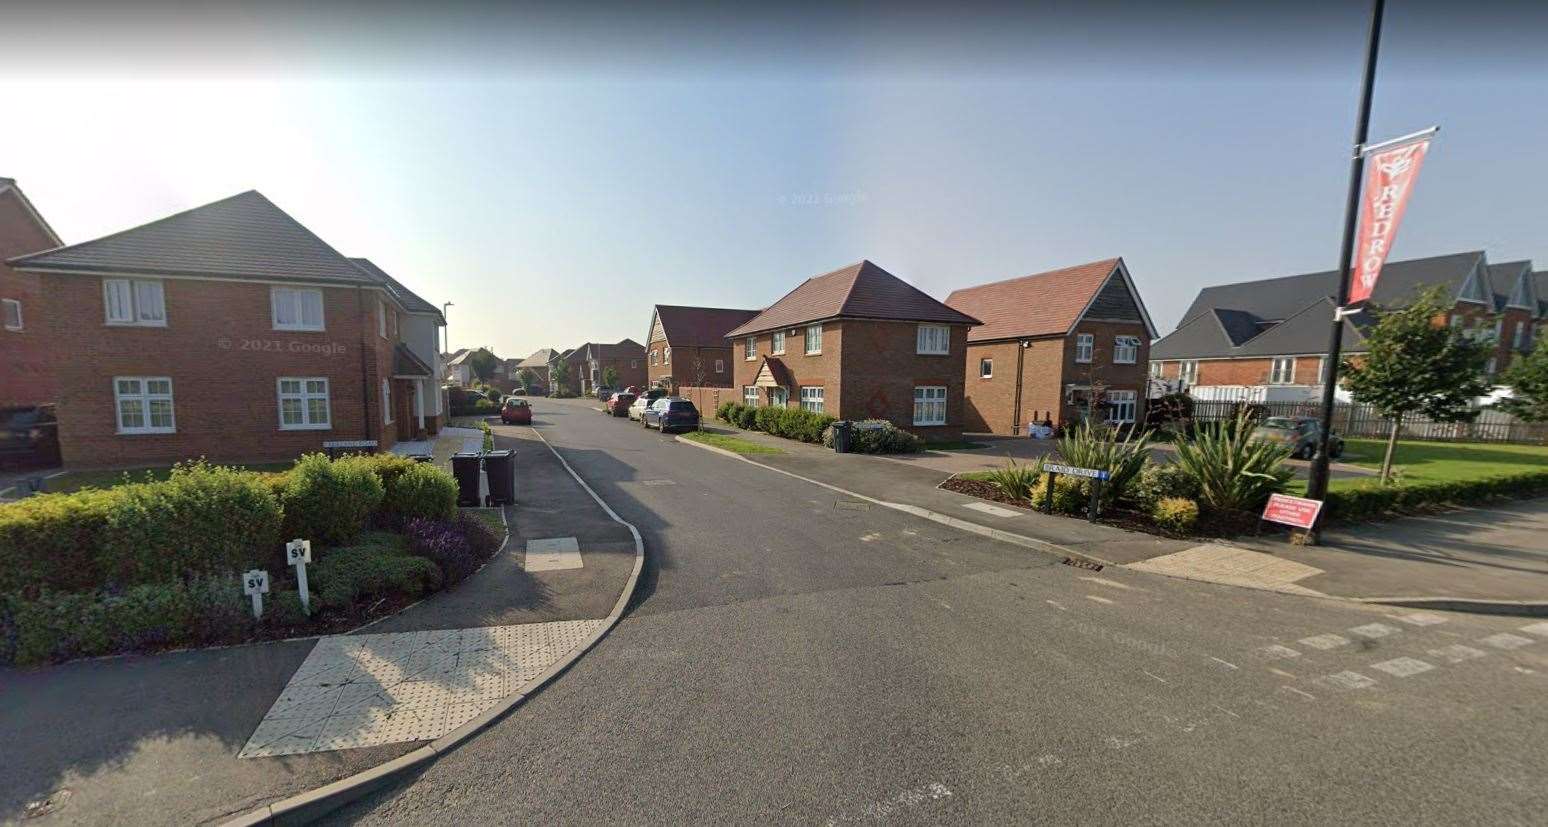 The first of the thefts took place in Braid Drive, Herne Bay, last week. Picture: Google